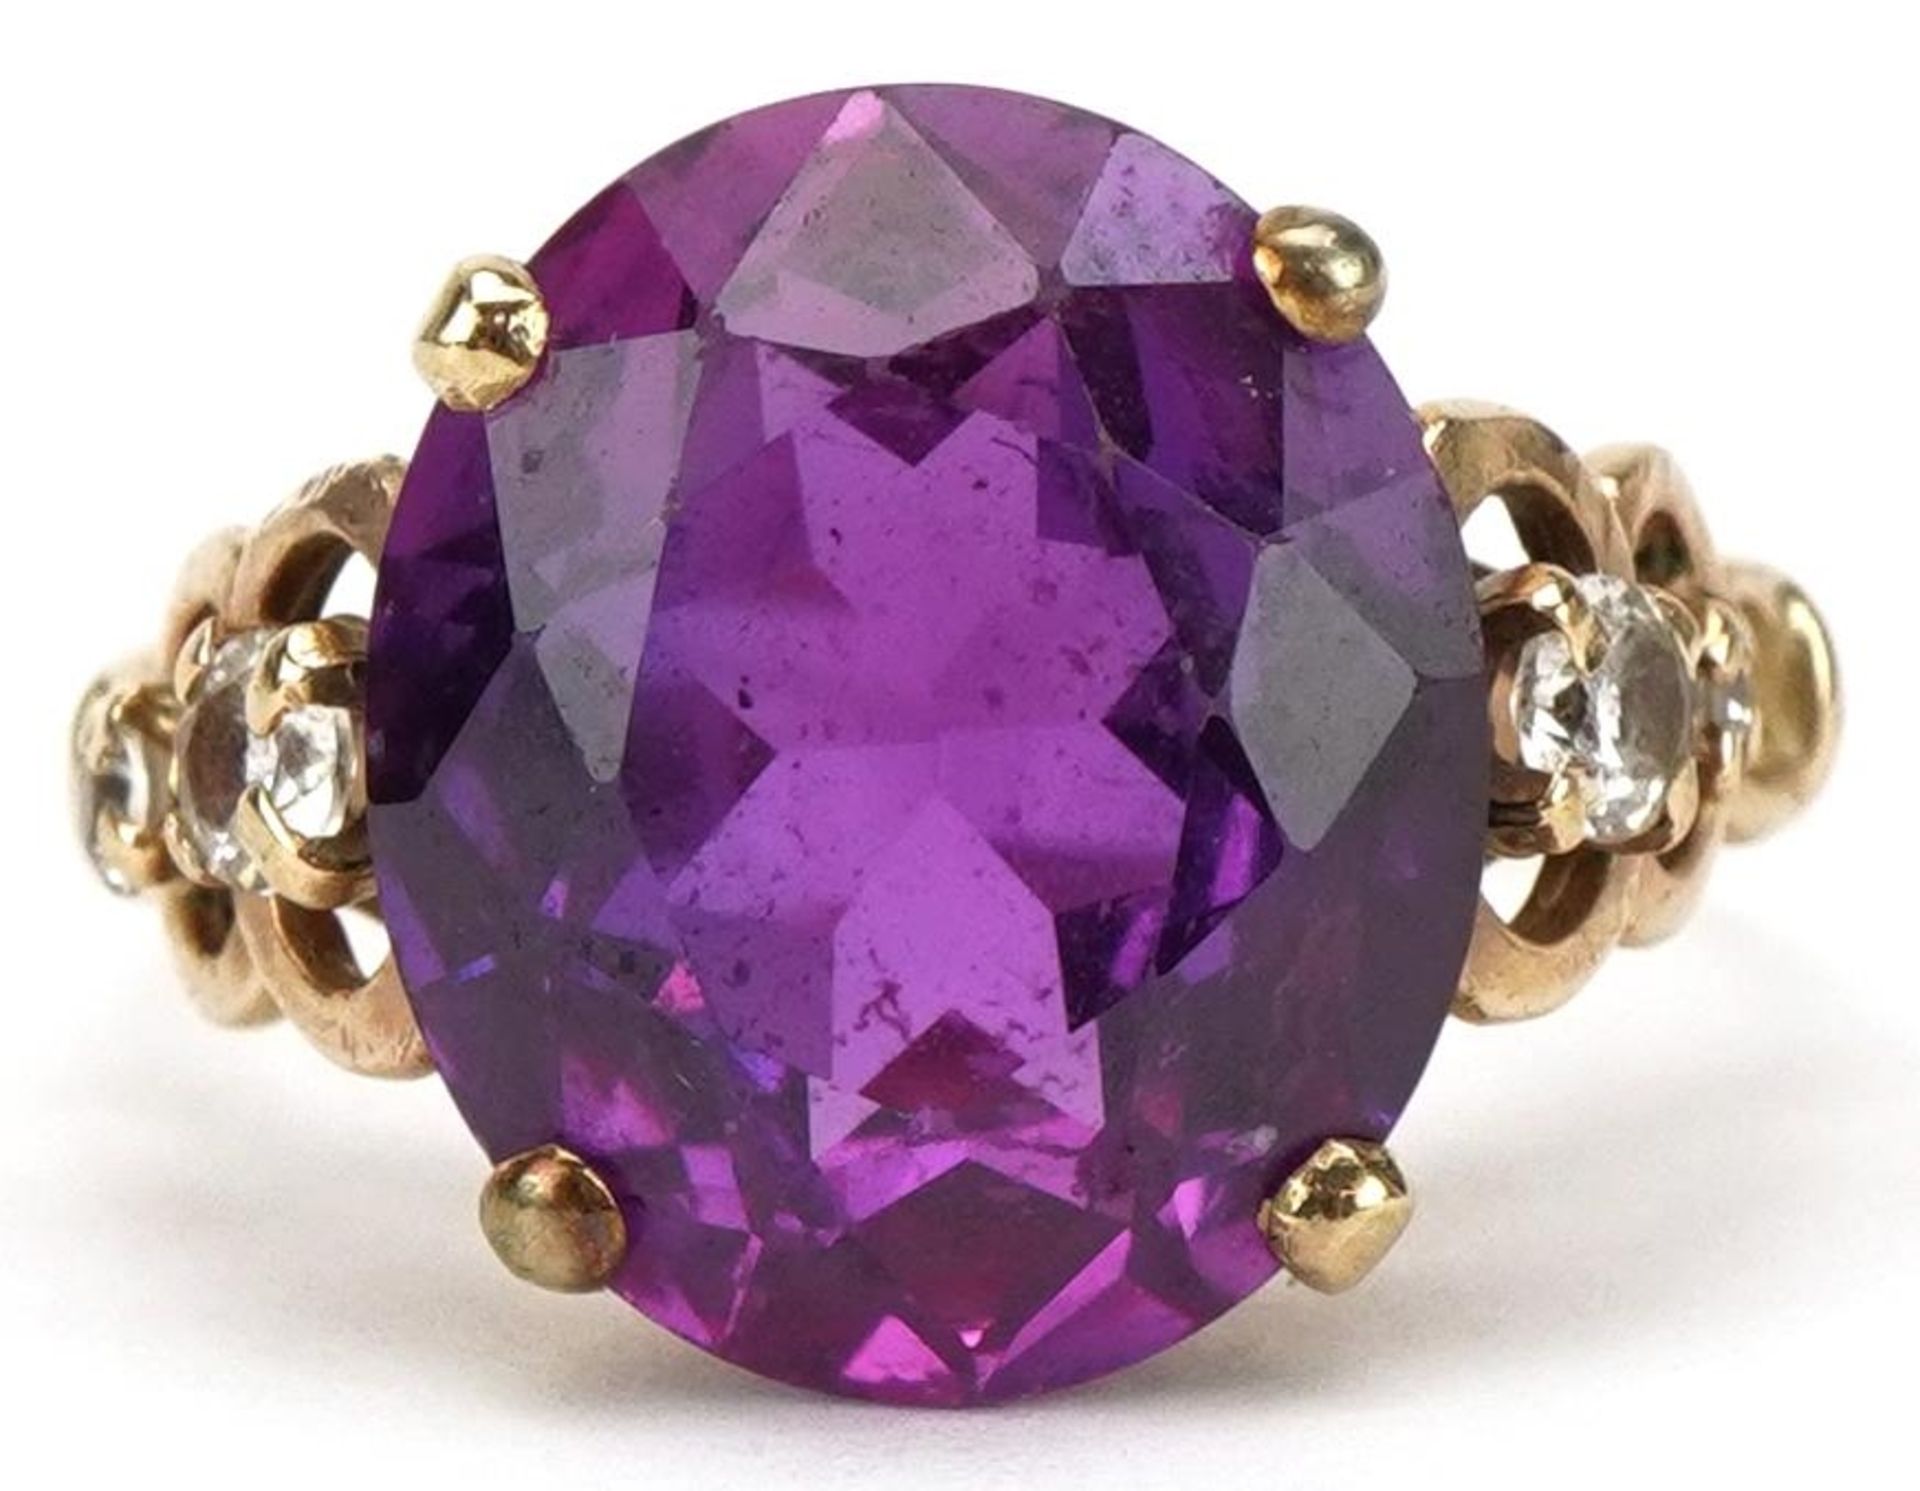 Purple stone solitaire ring, possibly alexandrite, set with clear stone set shoulders, the stone